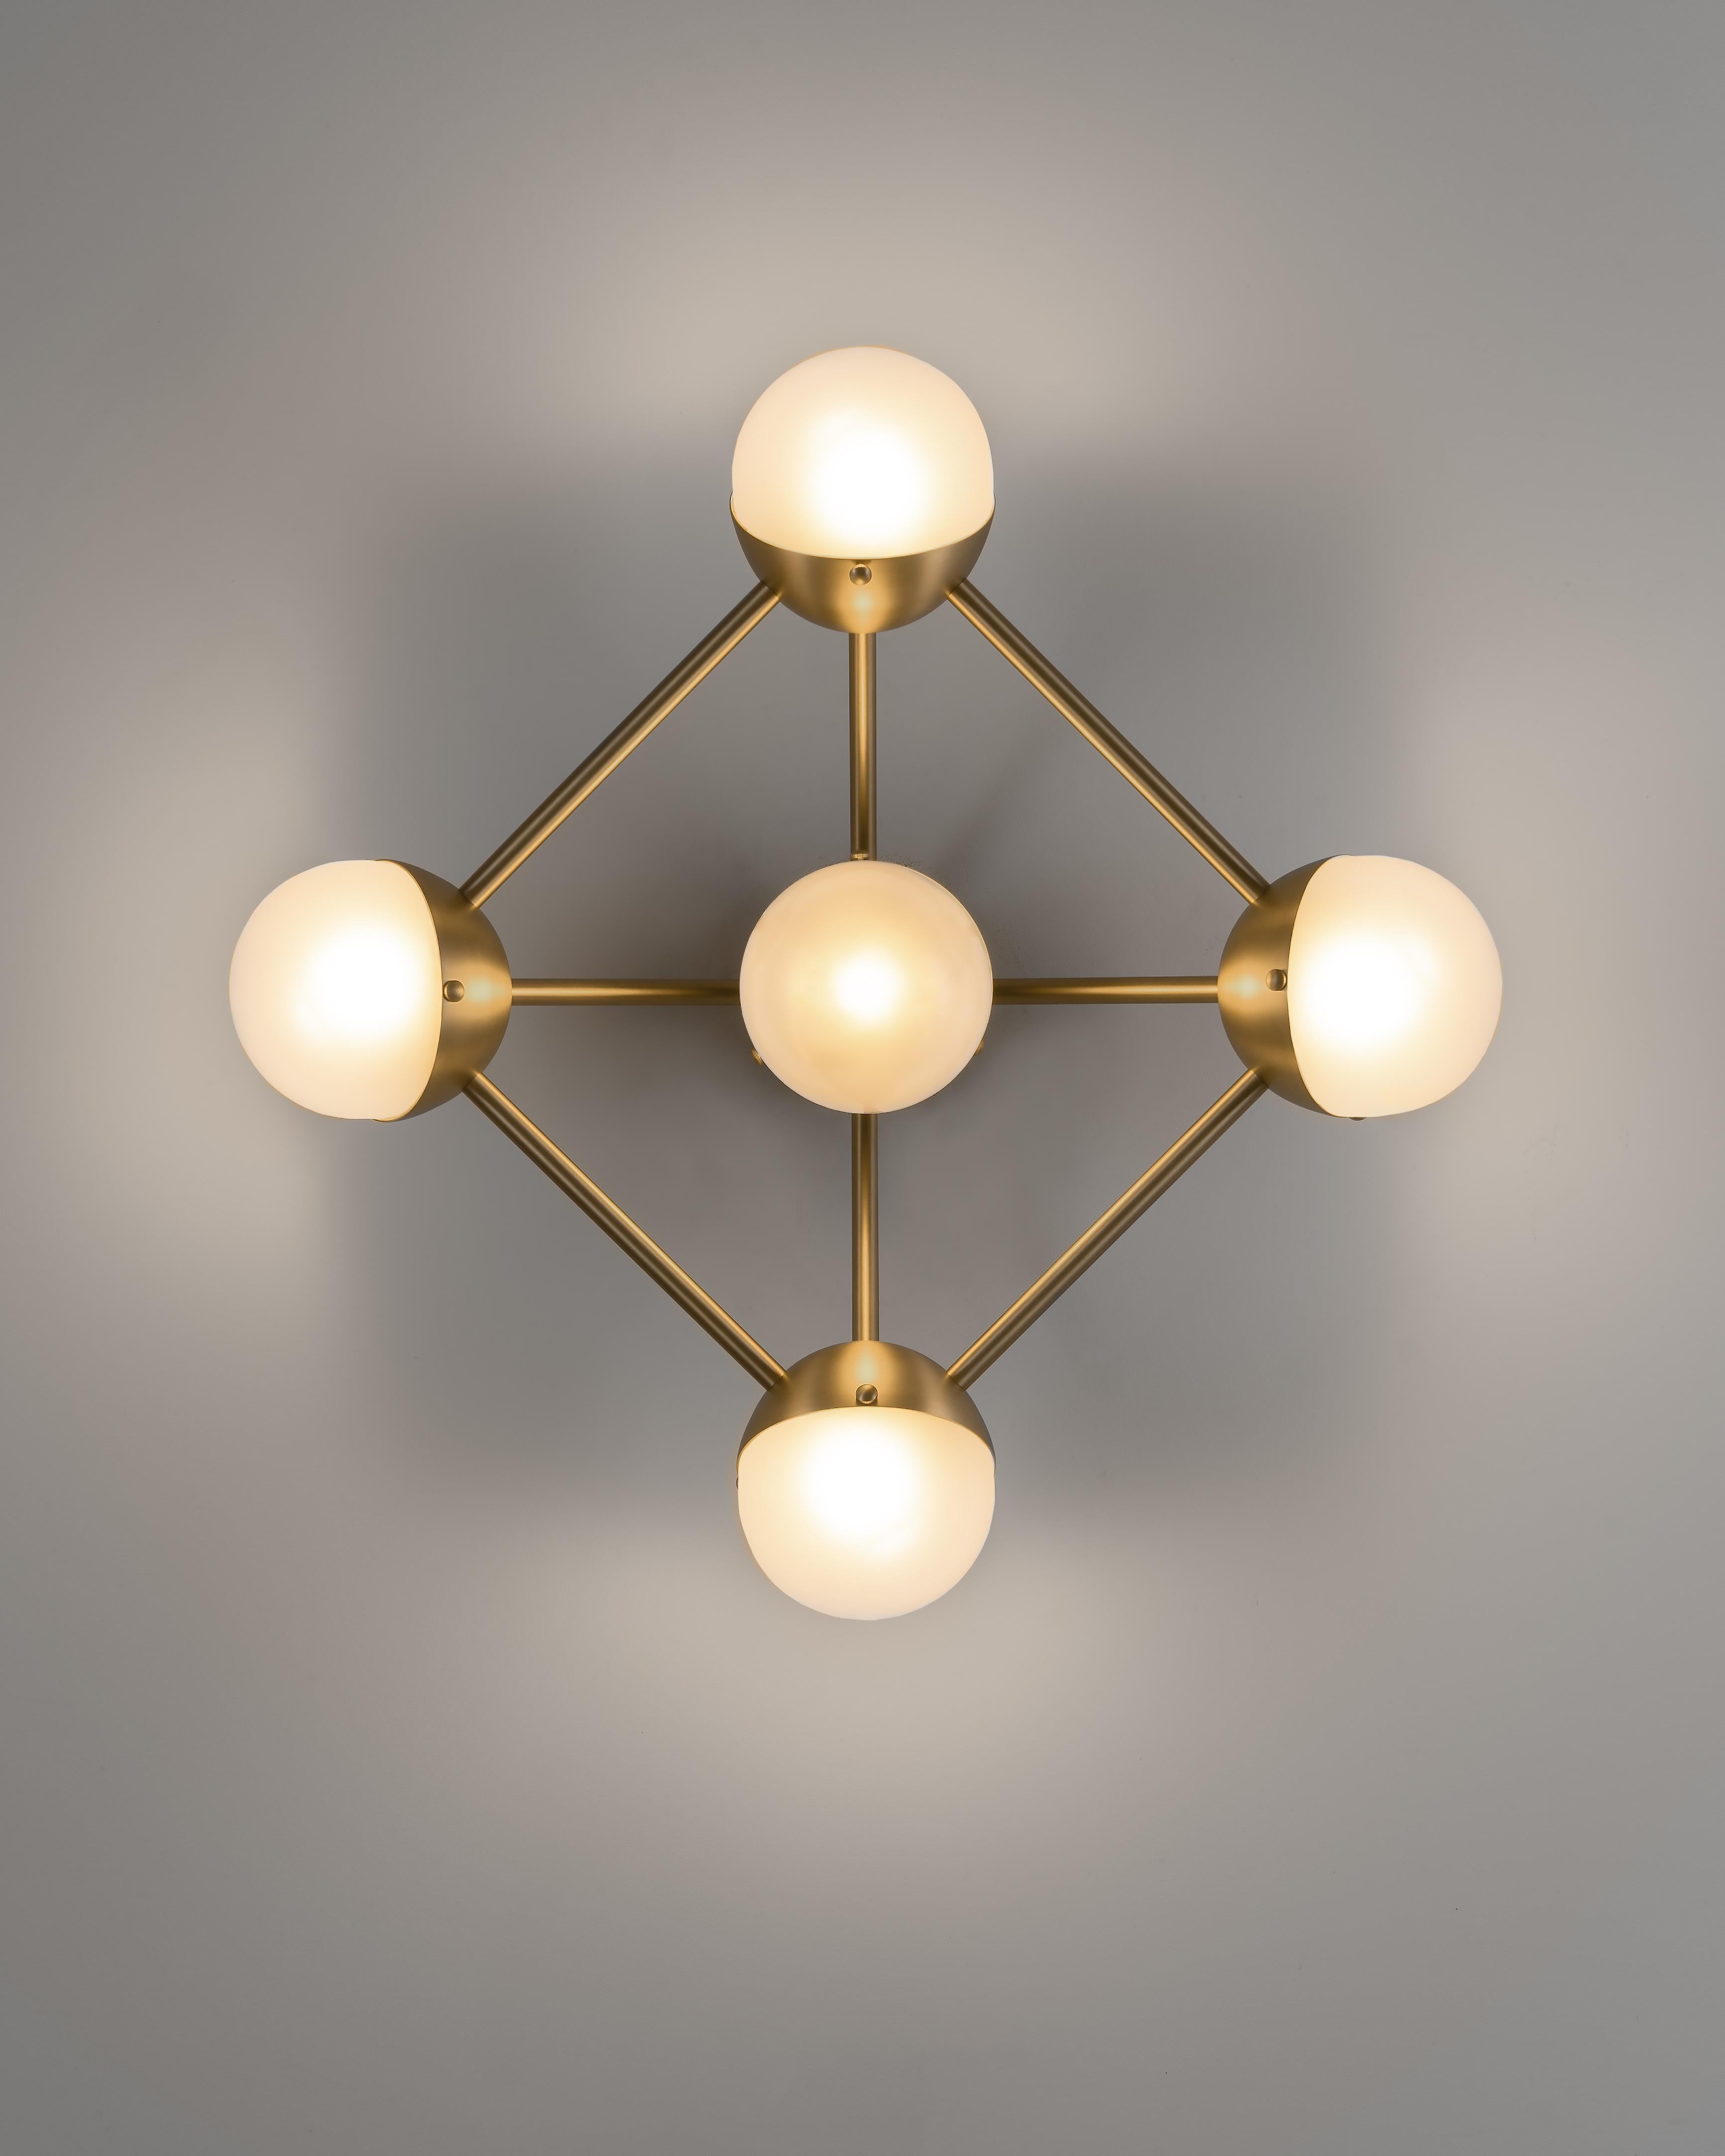 Molecule 5 Wall Sconce by Schwung.
Dimensions: W 58.4 x D 22.4 x H 58.4 cm.
Materials: Brass, Glass, PN finish.
Also Available: Black Gunmetal.

Light Source

LED Bulb (included): 5 x 5 W
Max Wattage: 5 x 10 W
Total Lumens: 2250-2500